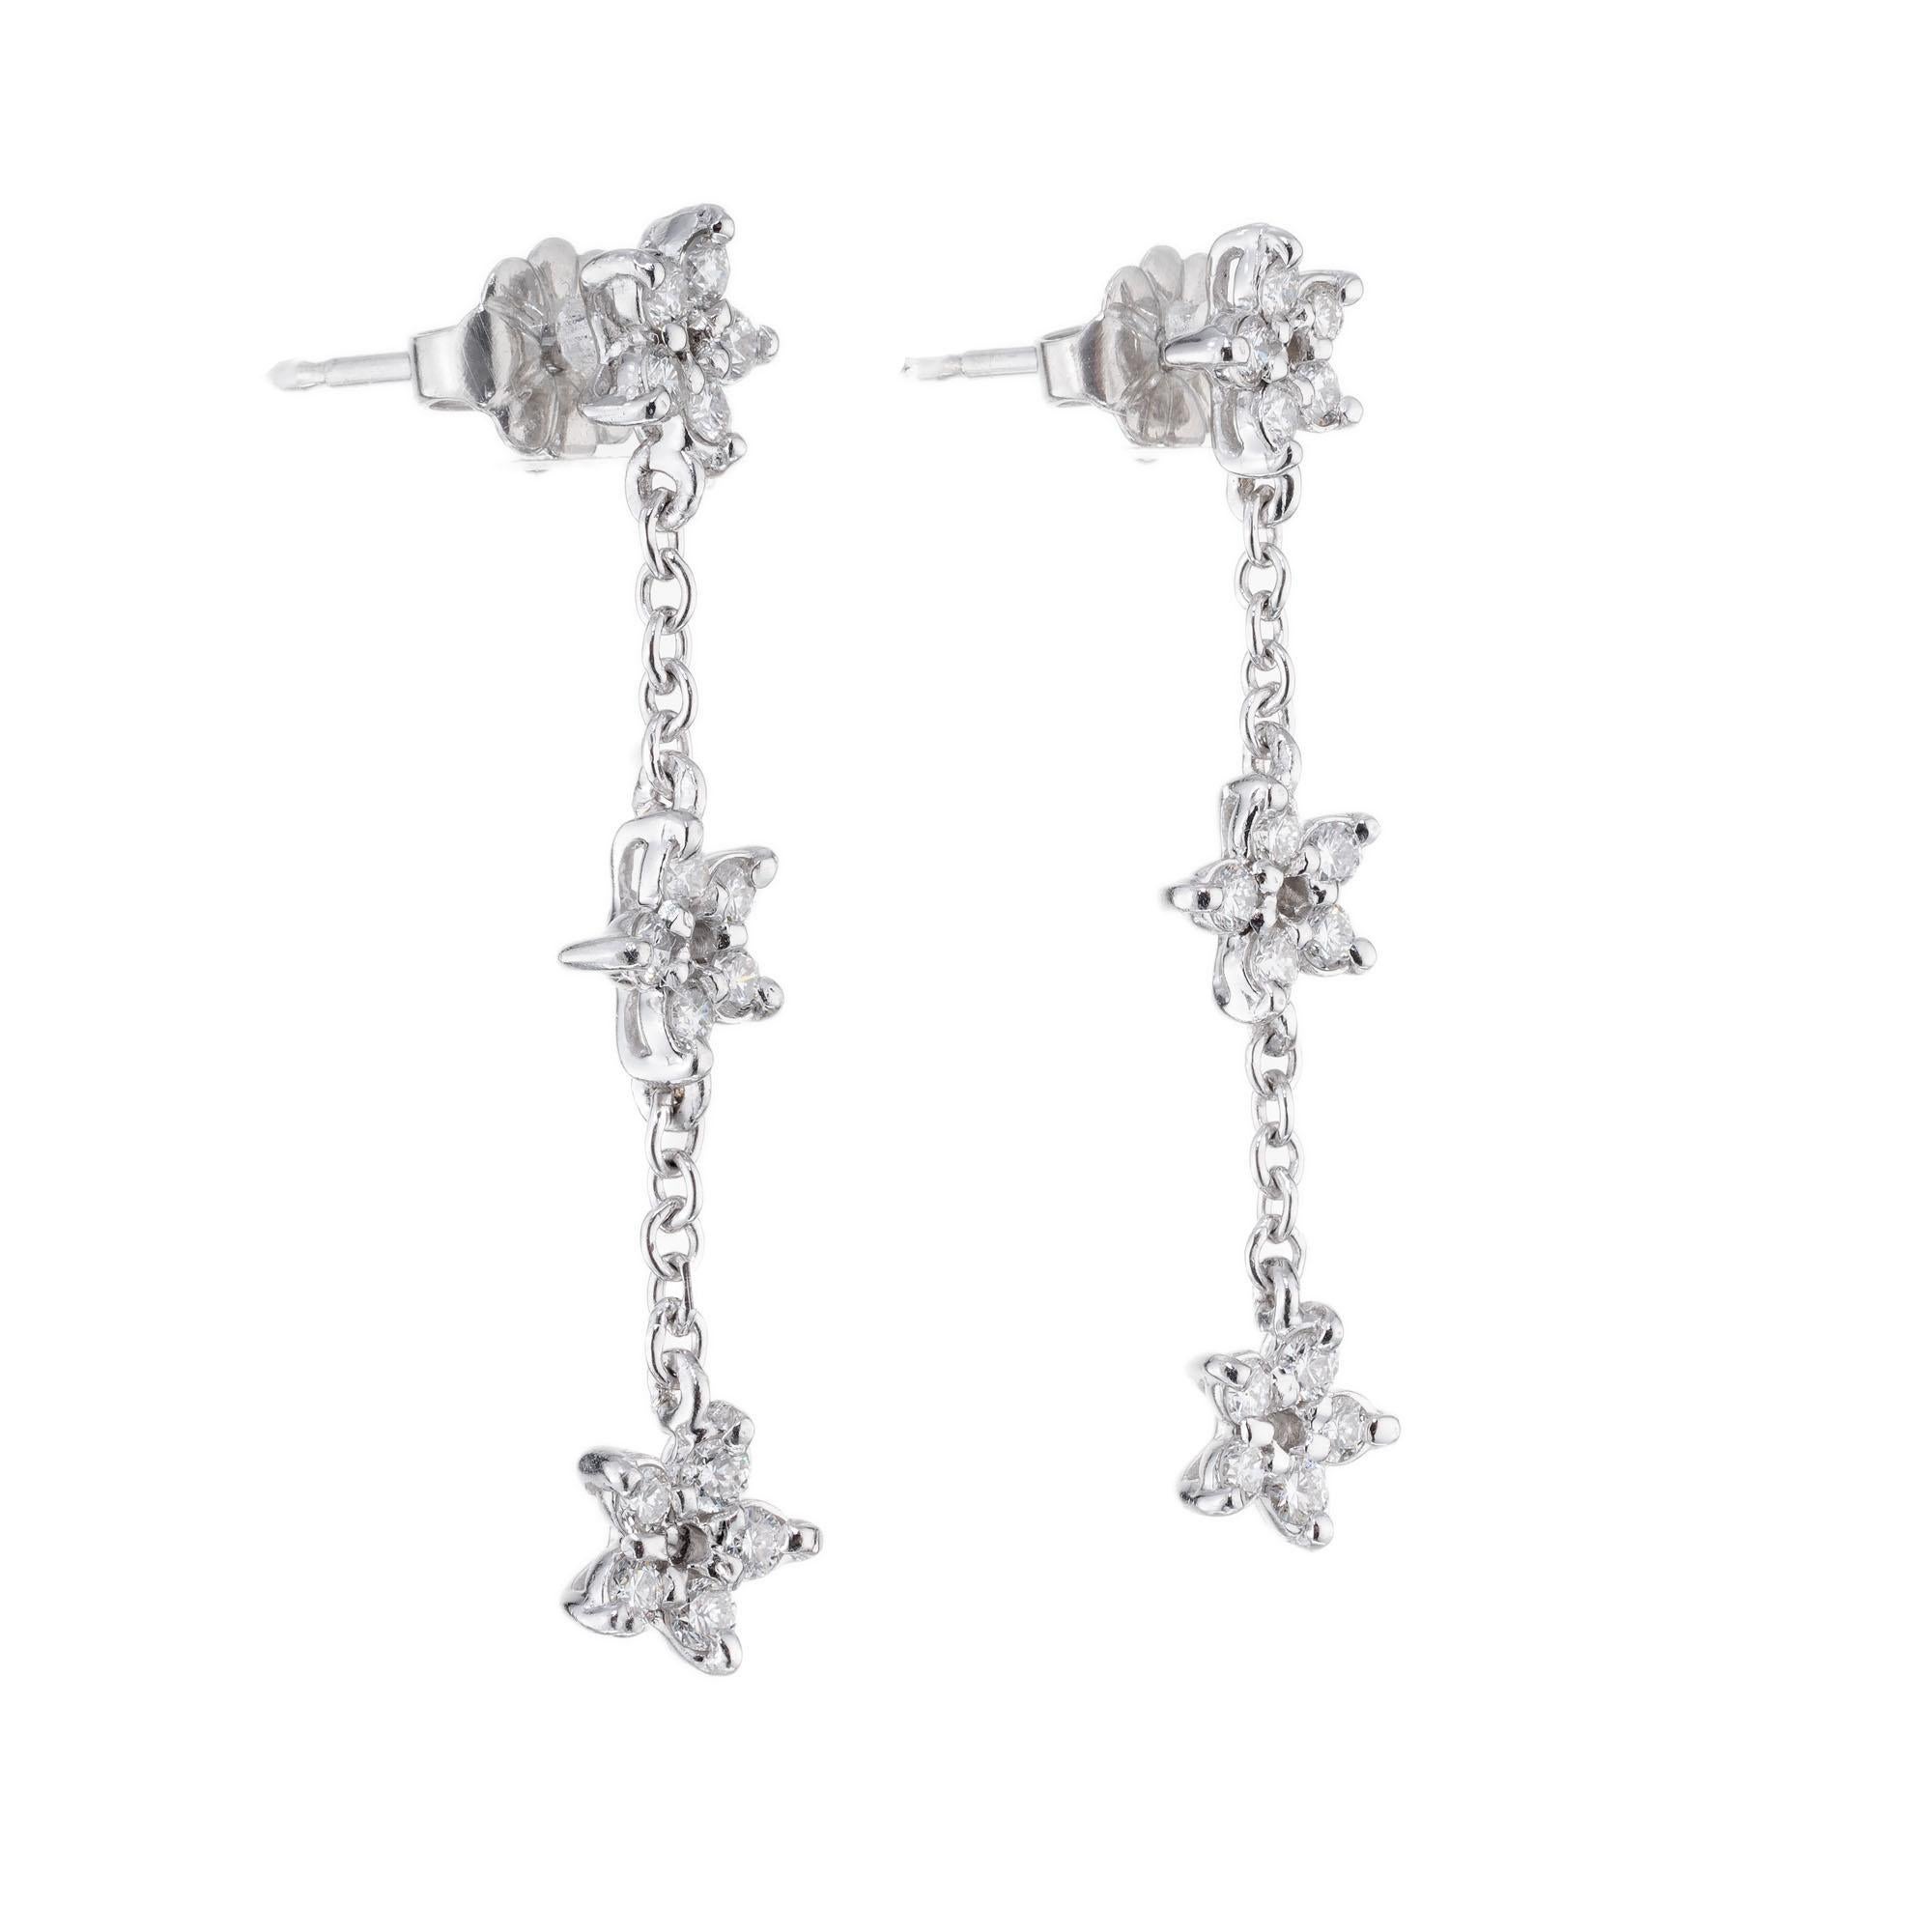 Peter Suchy petite triple star diamond platinum dangle drop earrings, with 30 round brilliant cut diamonds. Created in the Peter Suchy Workshop.
30 round brilliant cut diamonds, F-G VS approx. .60cts
Platinum 
Stamped: PT950
3.6 grams
Top to bottom: